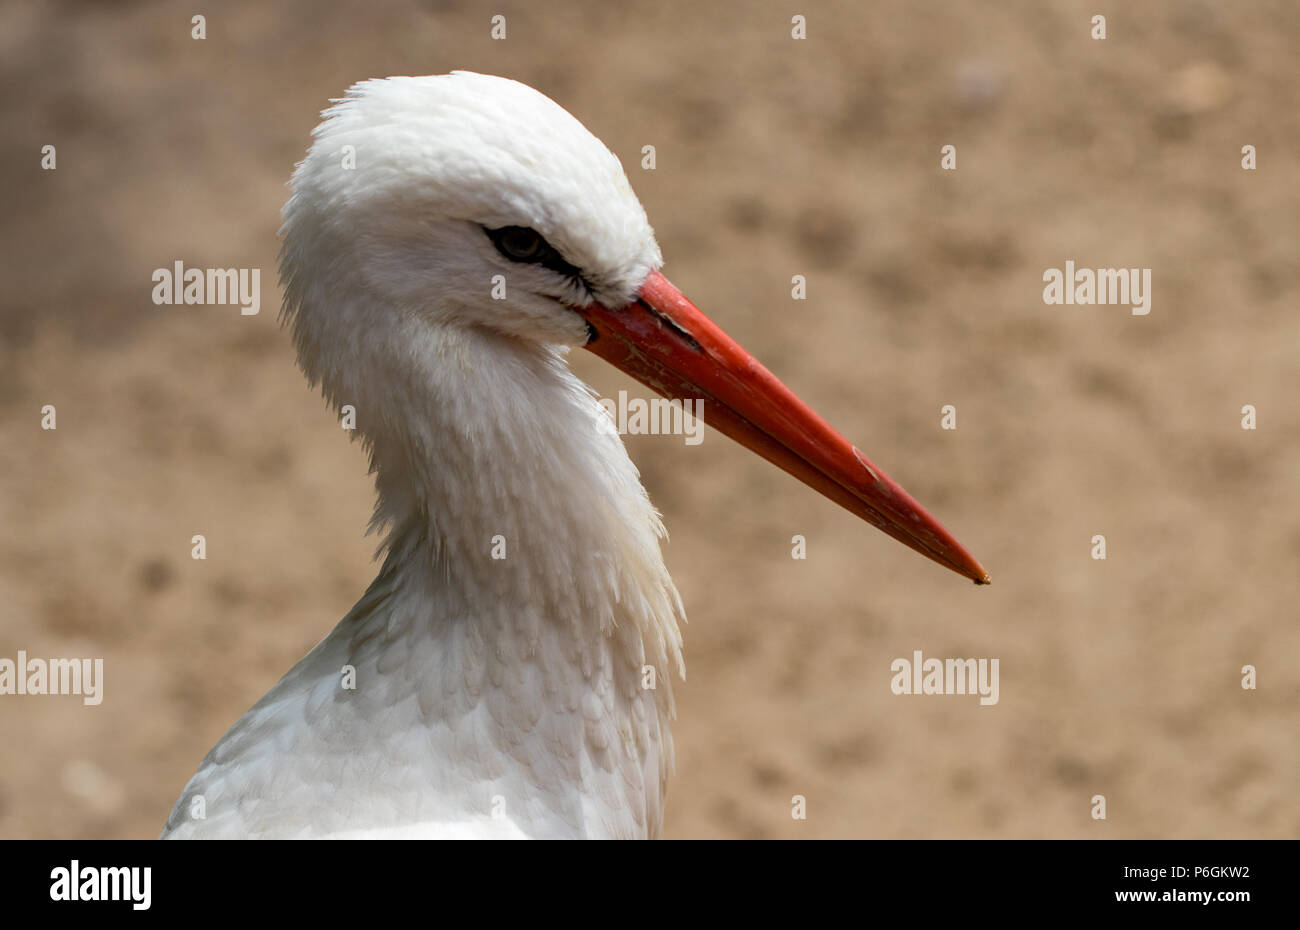 The White stork (Ciconia ciconia). In a zoo . Stock Photo